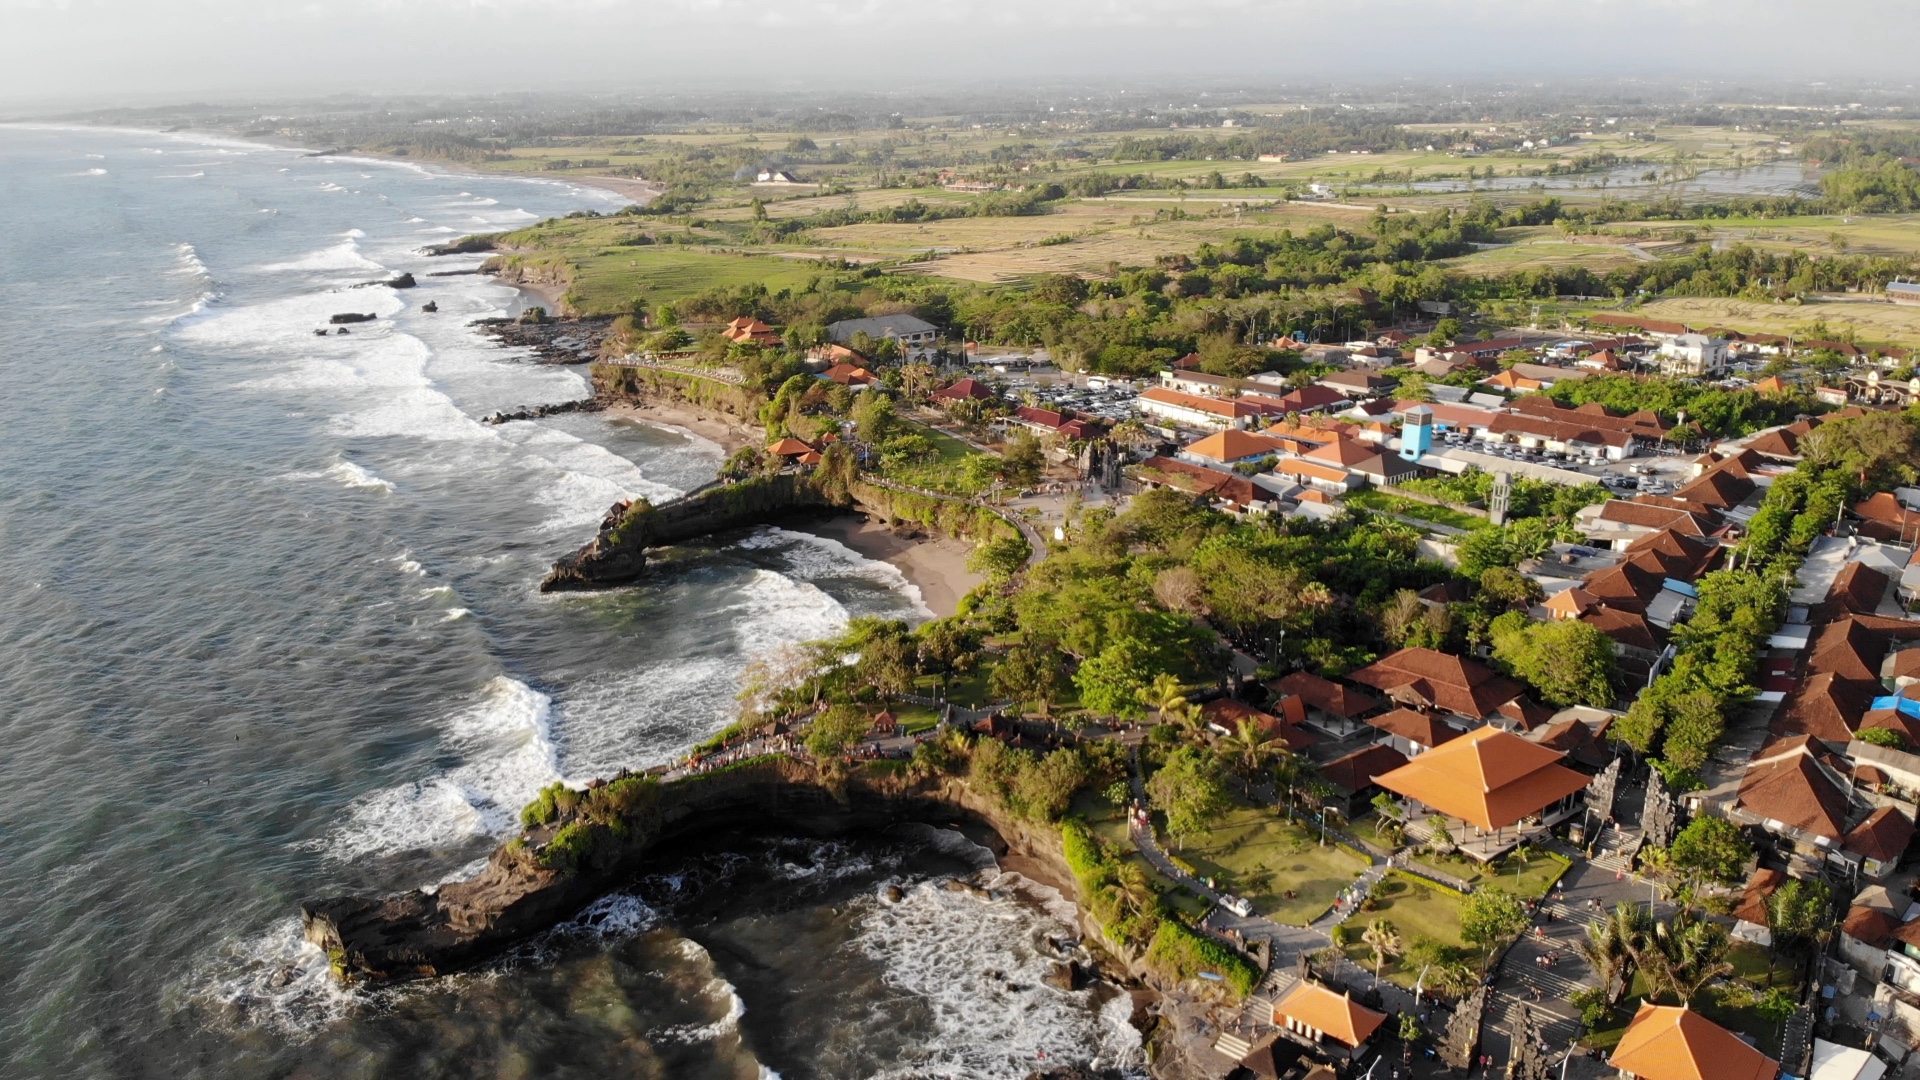 Drone Footage of the Tanah Lot Temple From the Top - Bali, Indonesia